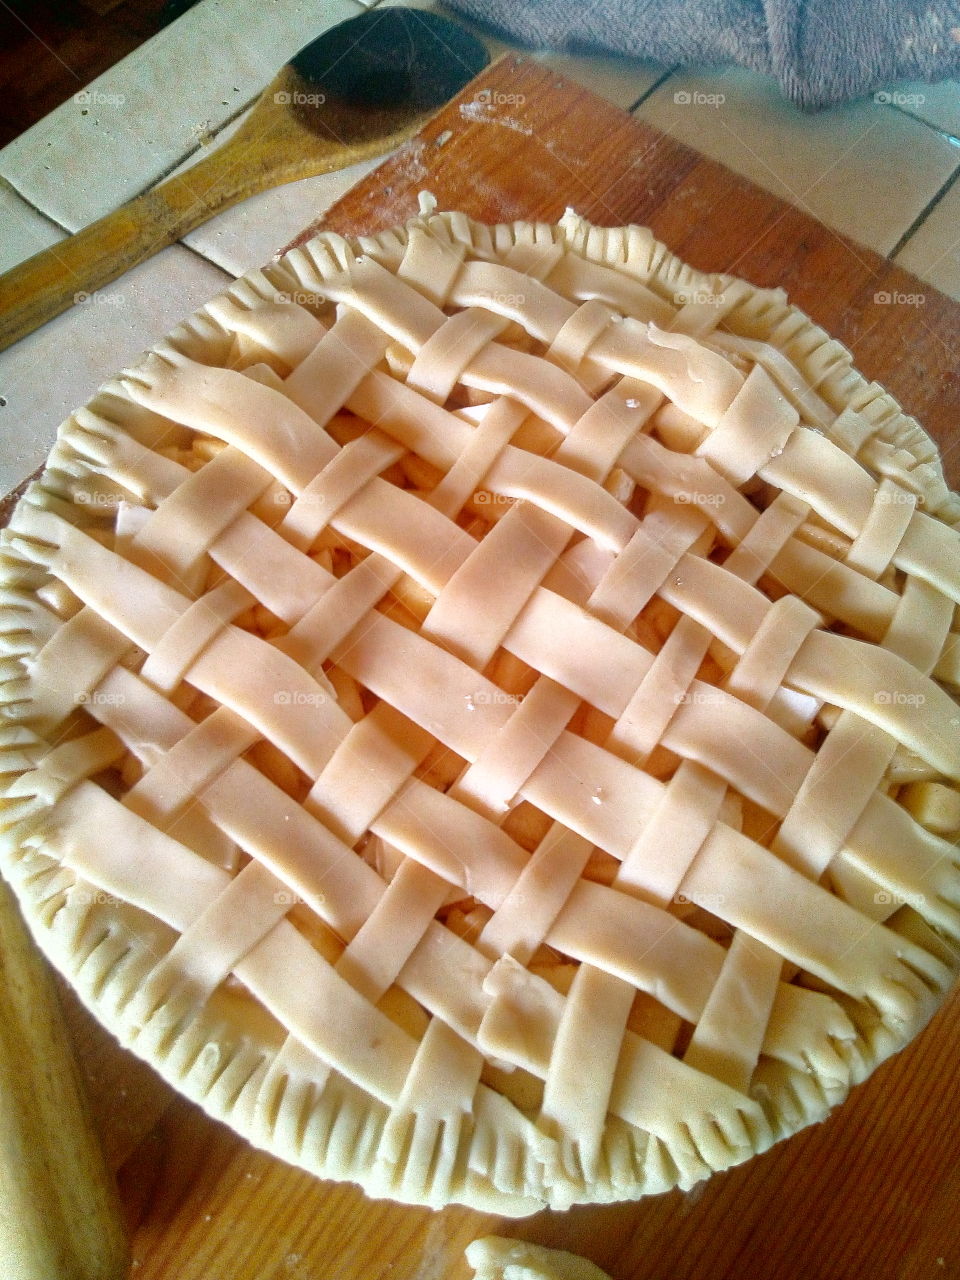 Baking some Delicious Apple pie for An Early Christmas Party.